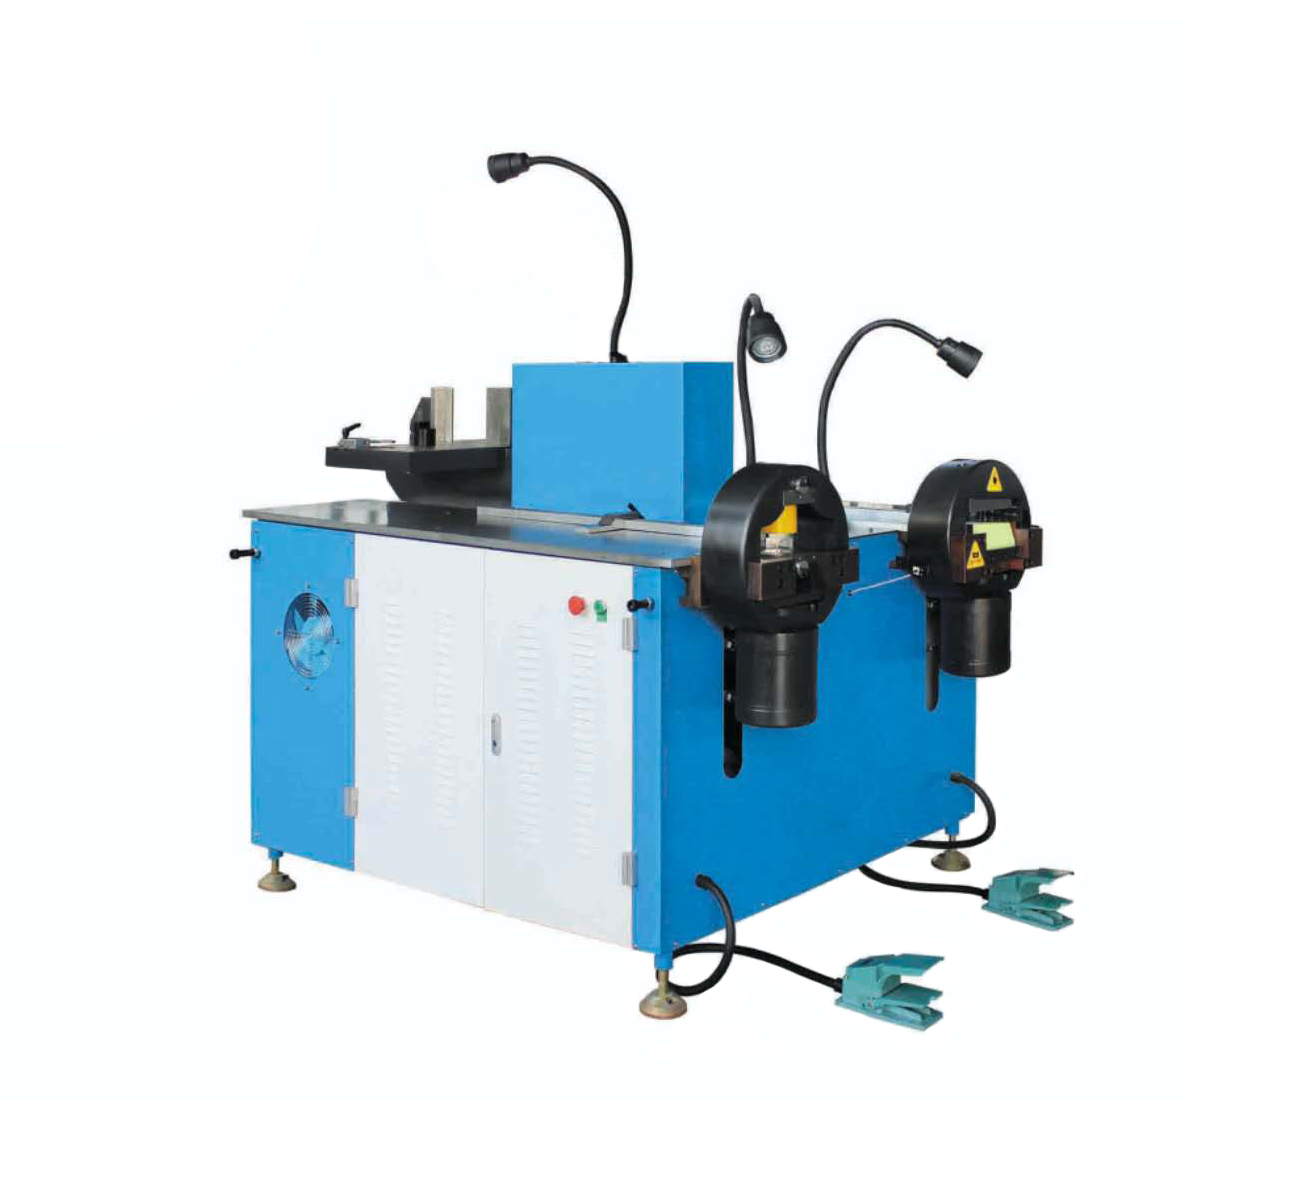 China Wholesale Copper Bender Tool Manufacturers - Good Quality China Factory Sale Various Multi-Function Machine Press Briqueting Hydraulic Scrap Metal Used Car Baler for Sale  – Gaoji